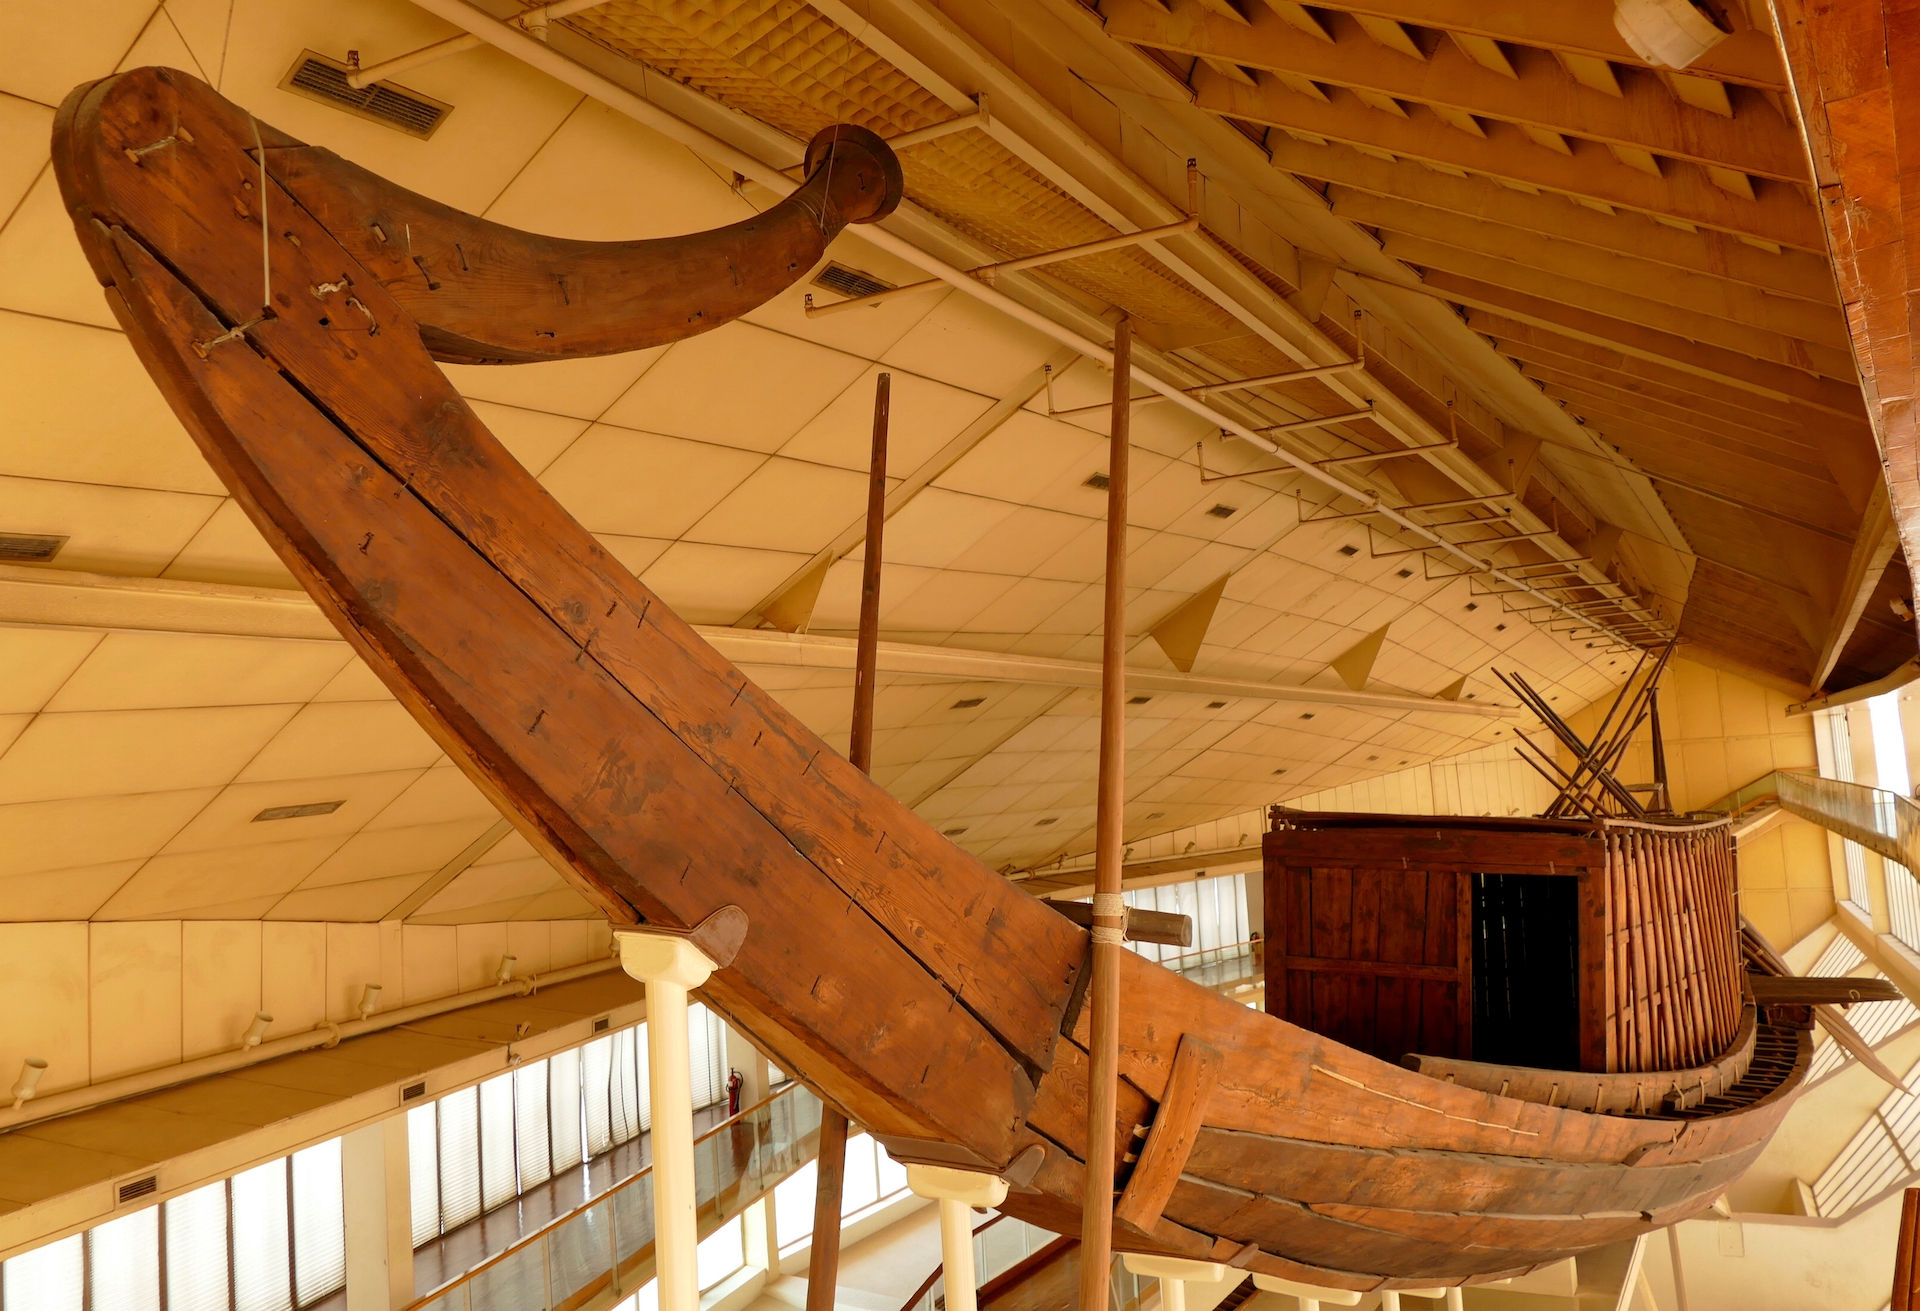 The Khufu ship on display in a museum